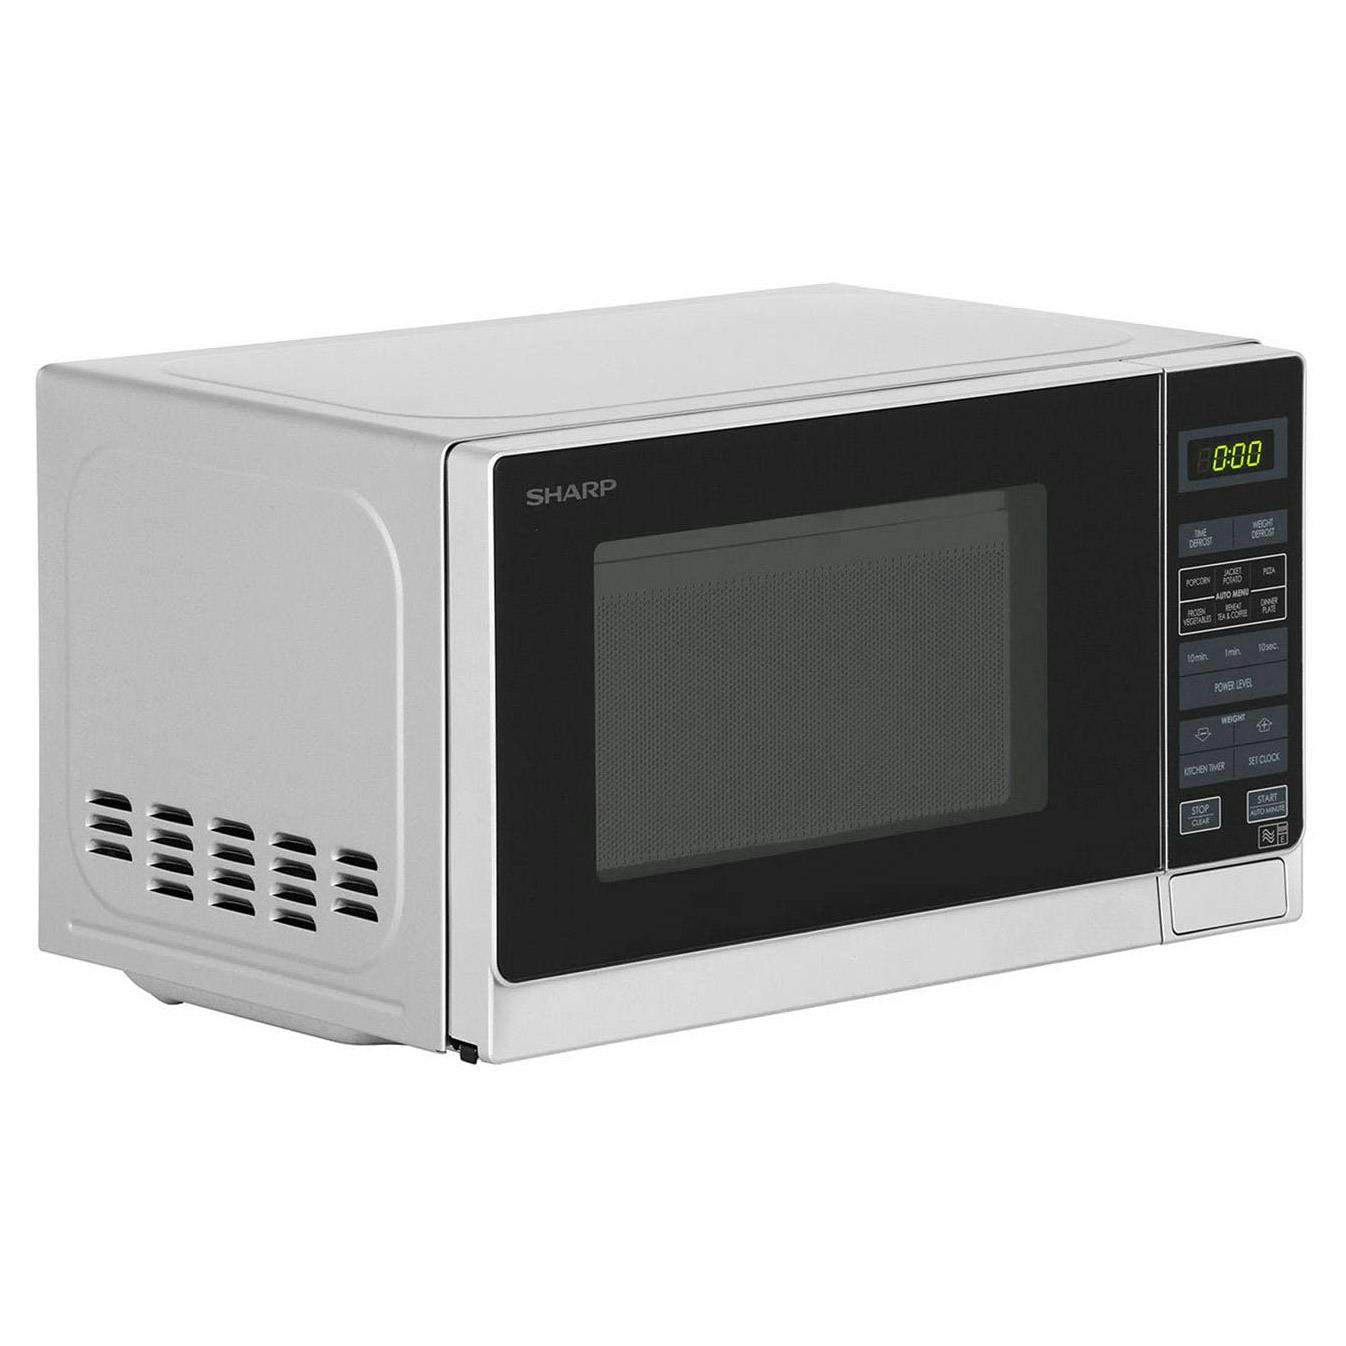 Sharp R272SLM Compact Microwave Oven in Silver, 800W 20 litre